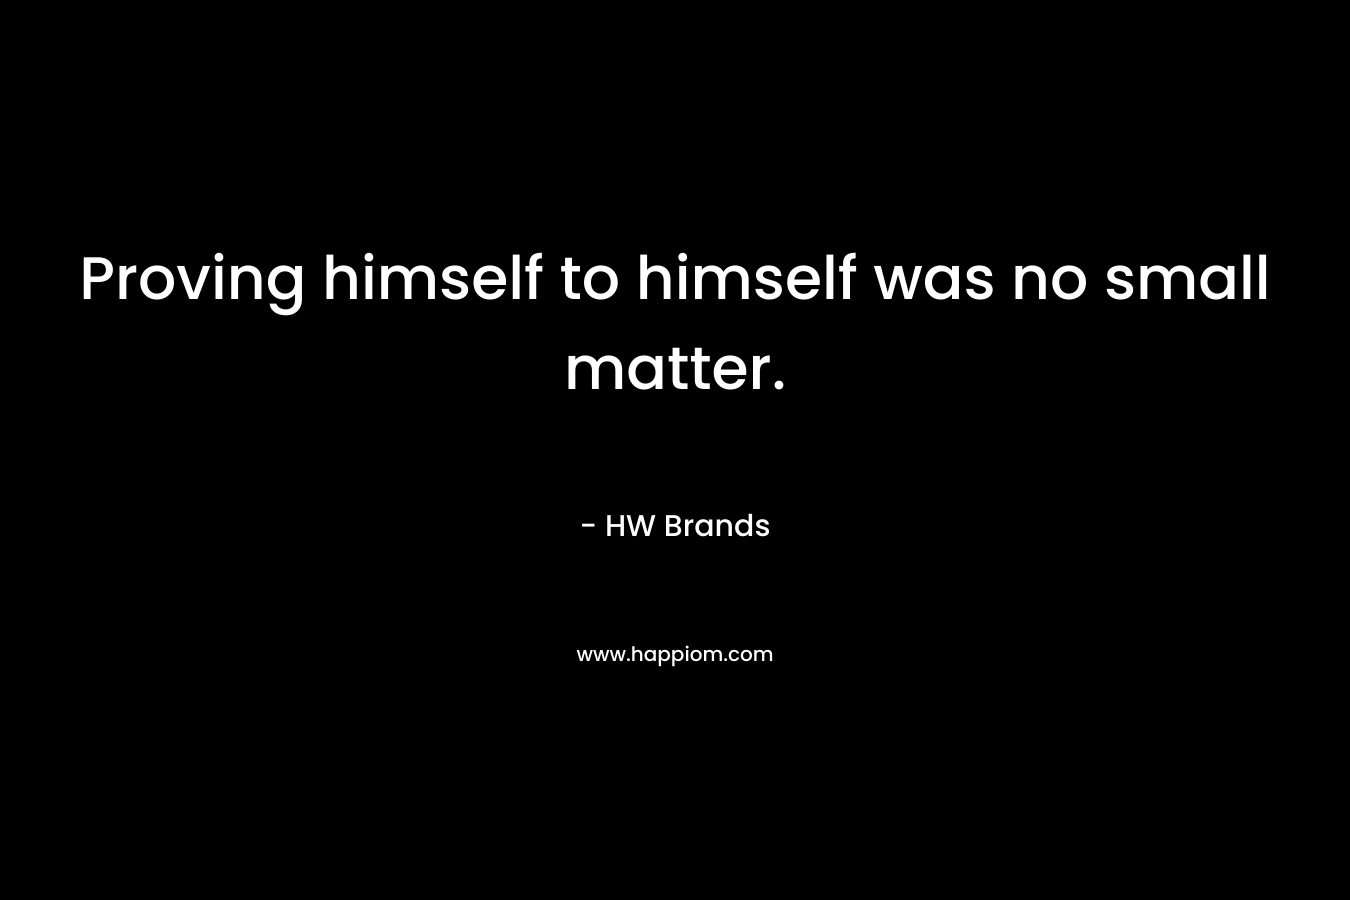 Proving himself to himself was no small matter. – HW Brands